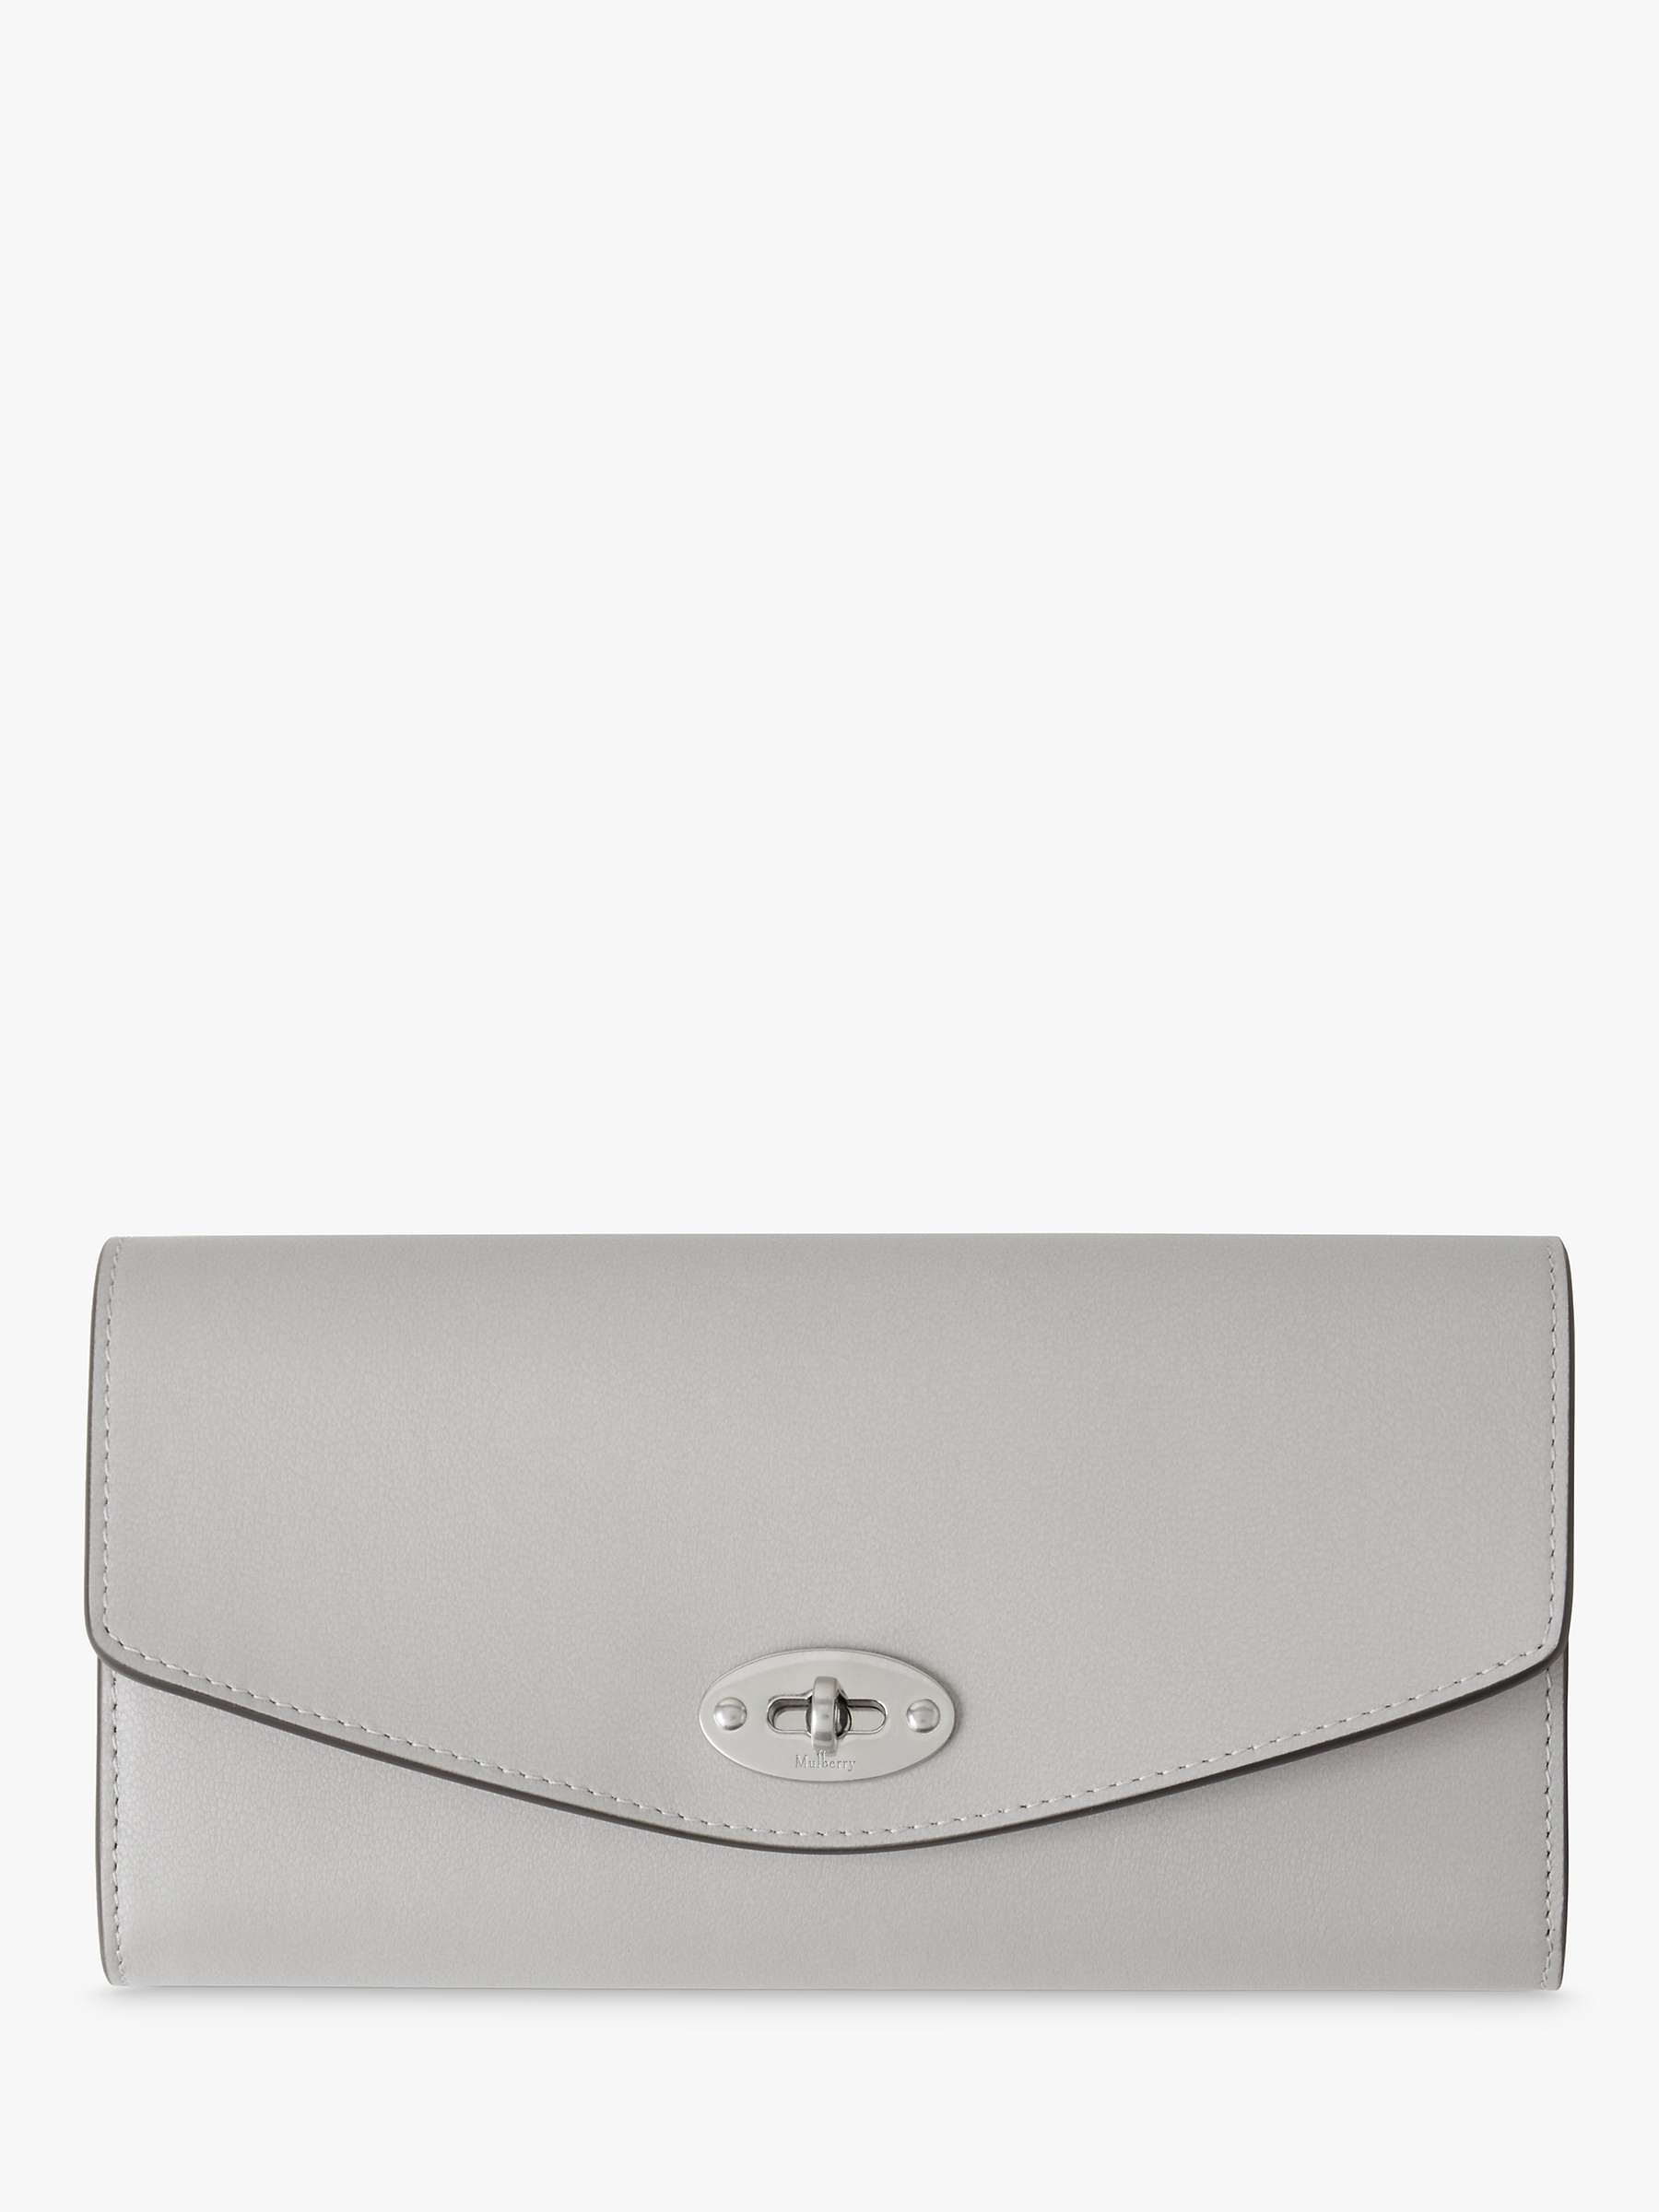 Buy Mulberry Darley Micro Classic Grain Leather Wallet Online at johnlewis.com